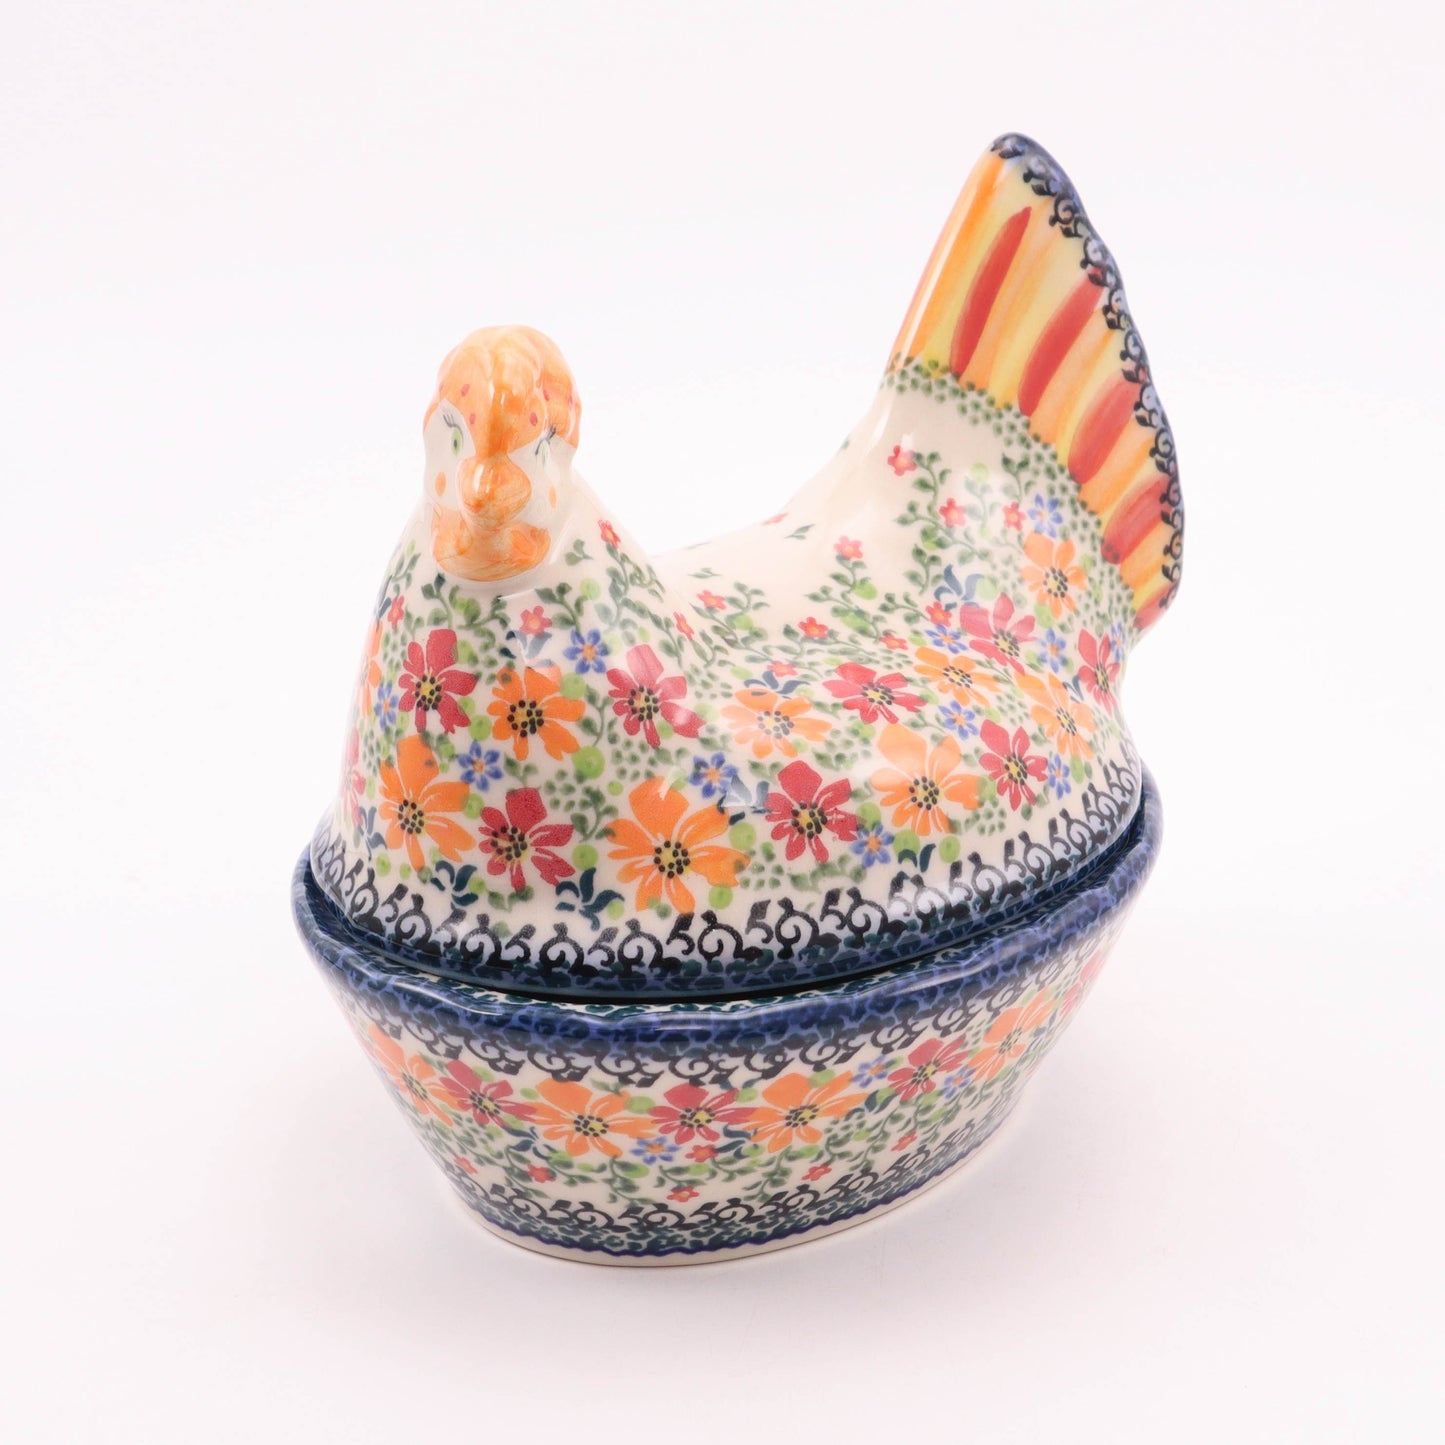 7"x5"x7" Covered Hen Container. Pattern: Daybreak